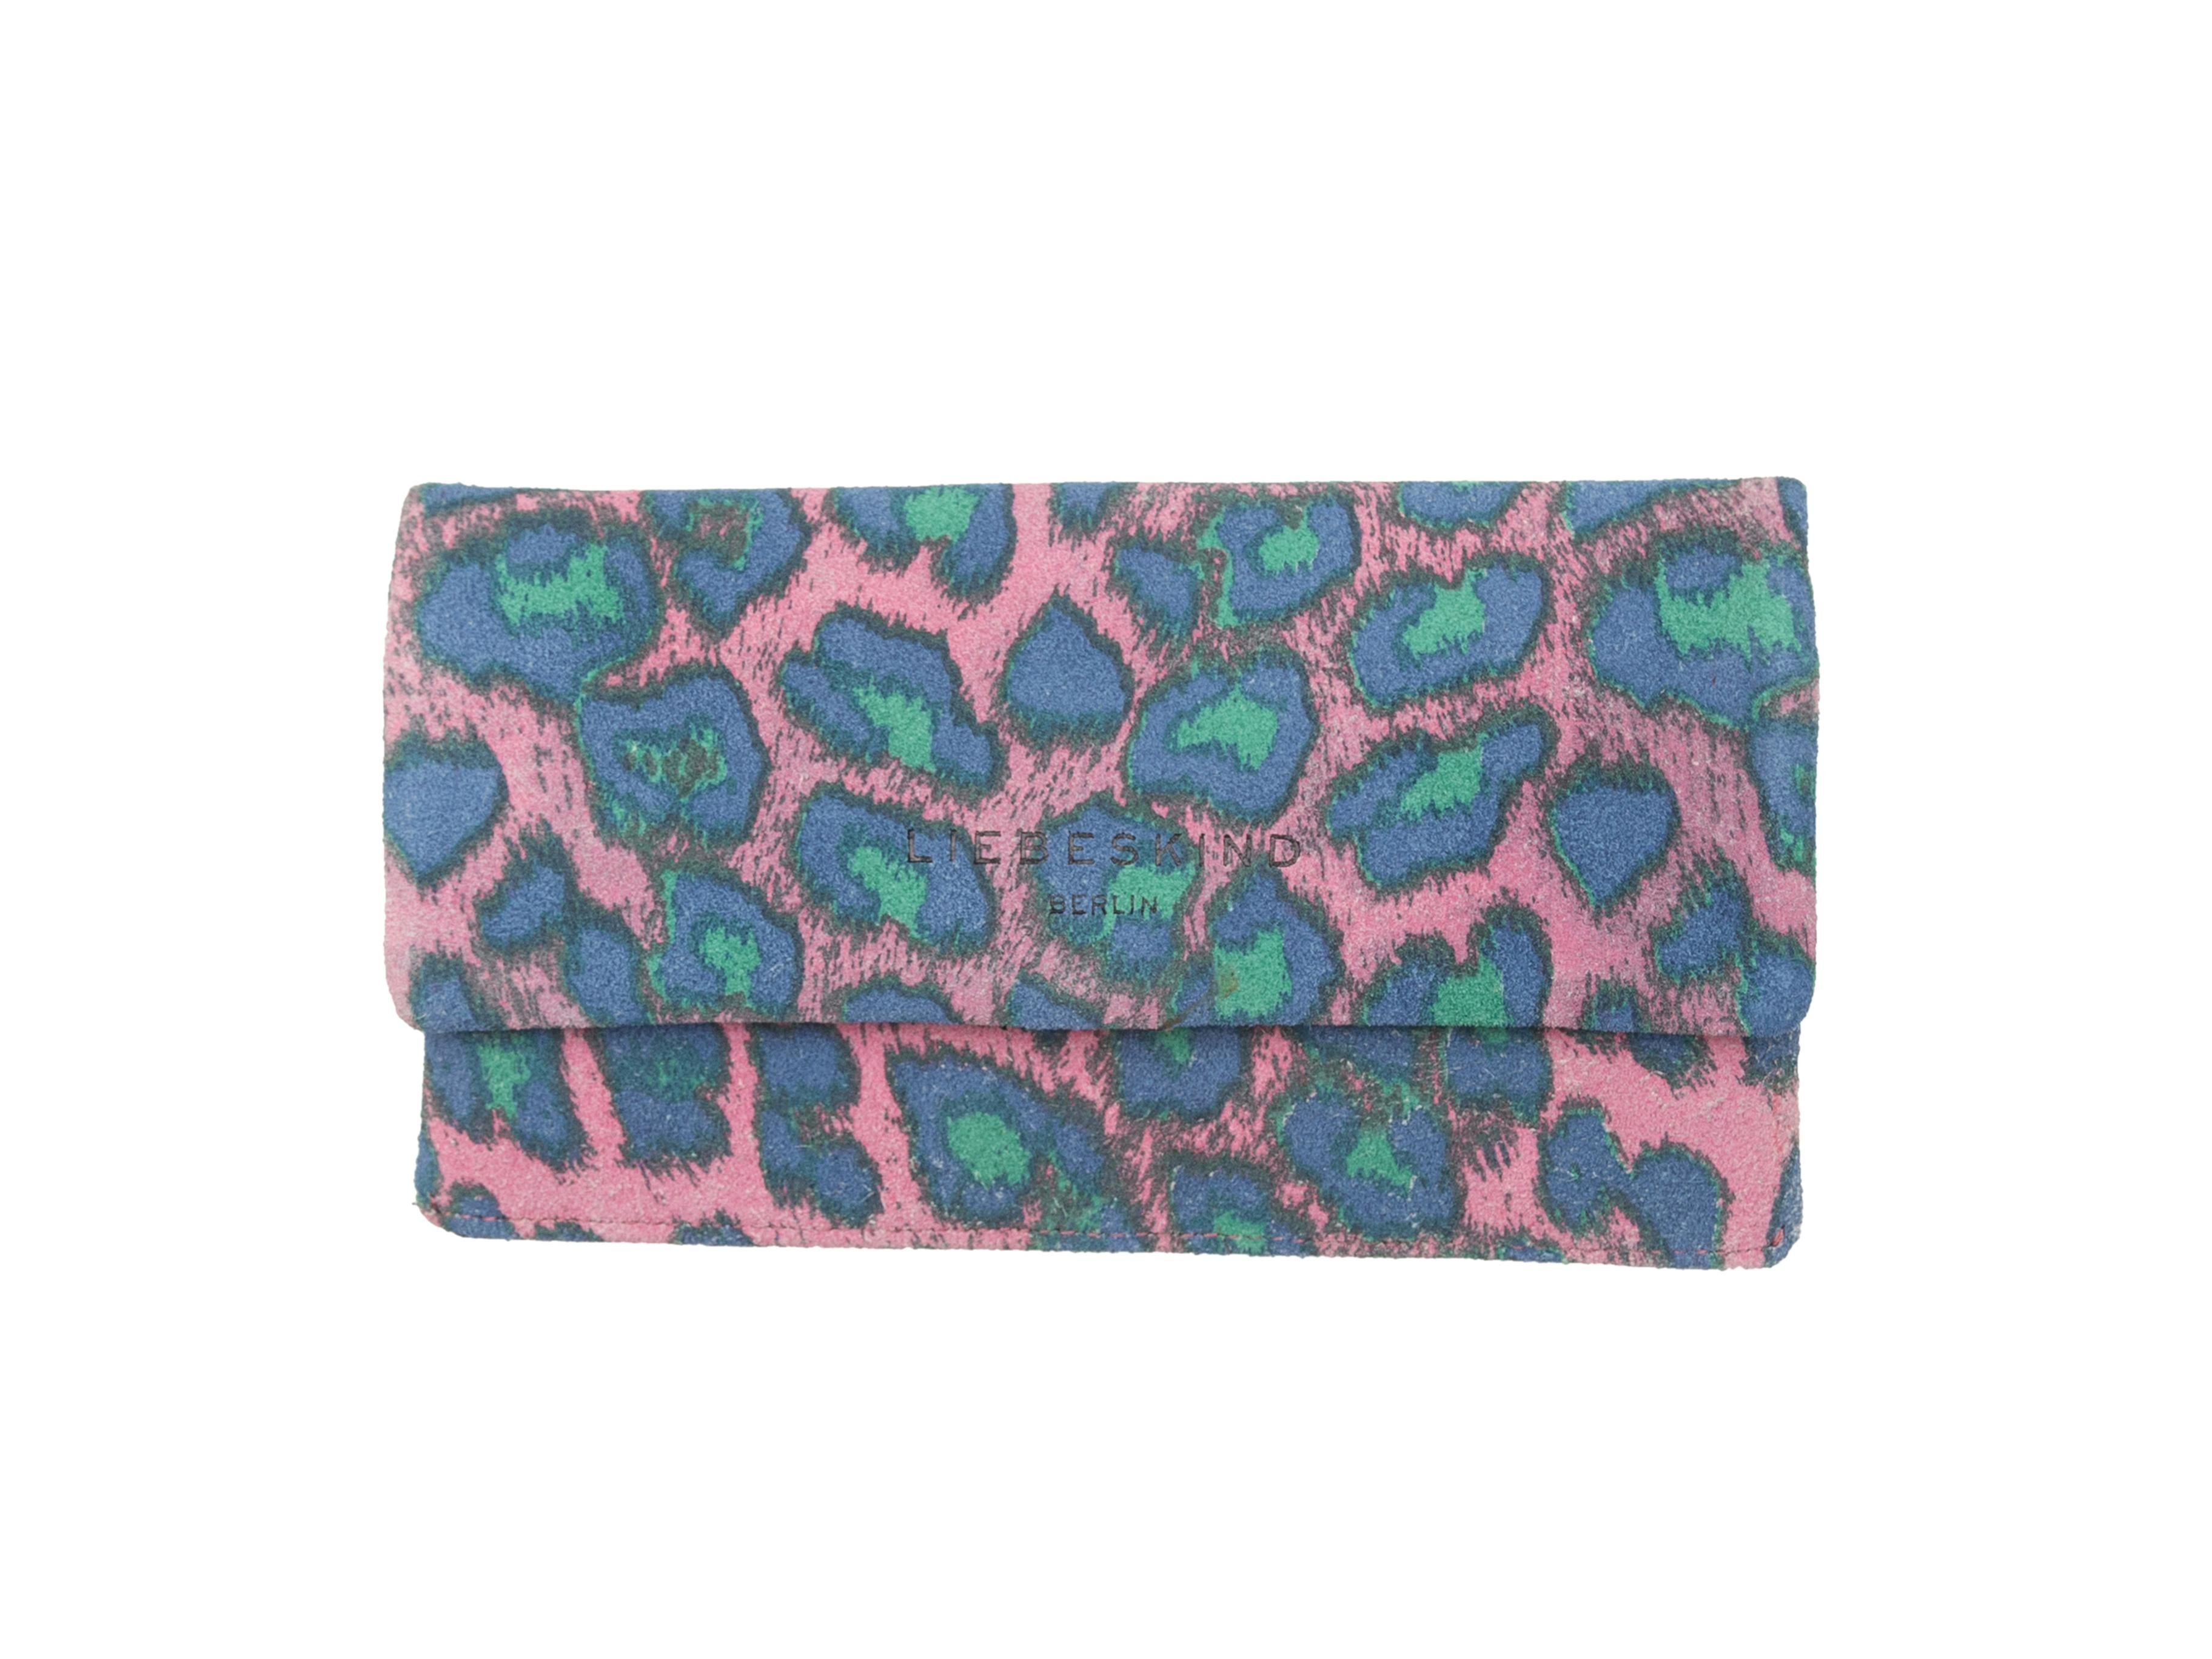 Product details: Light pink, blue, and teal leopard print suede continental wallet by Liebeskind. Exterior back zip pocket. Interior card and cash slots. Snap closure at front flap. 1